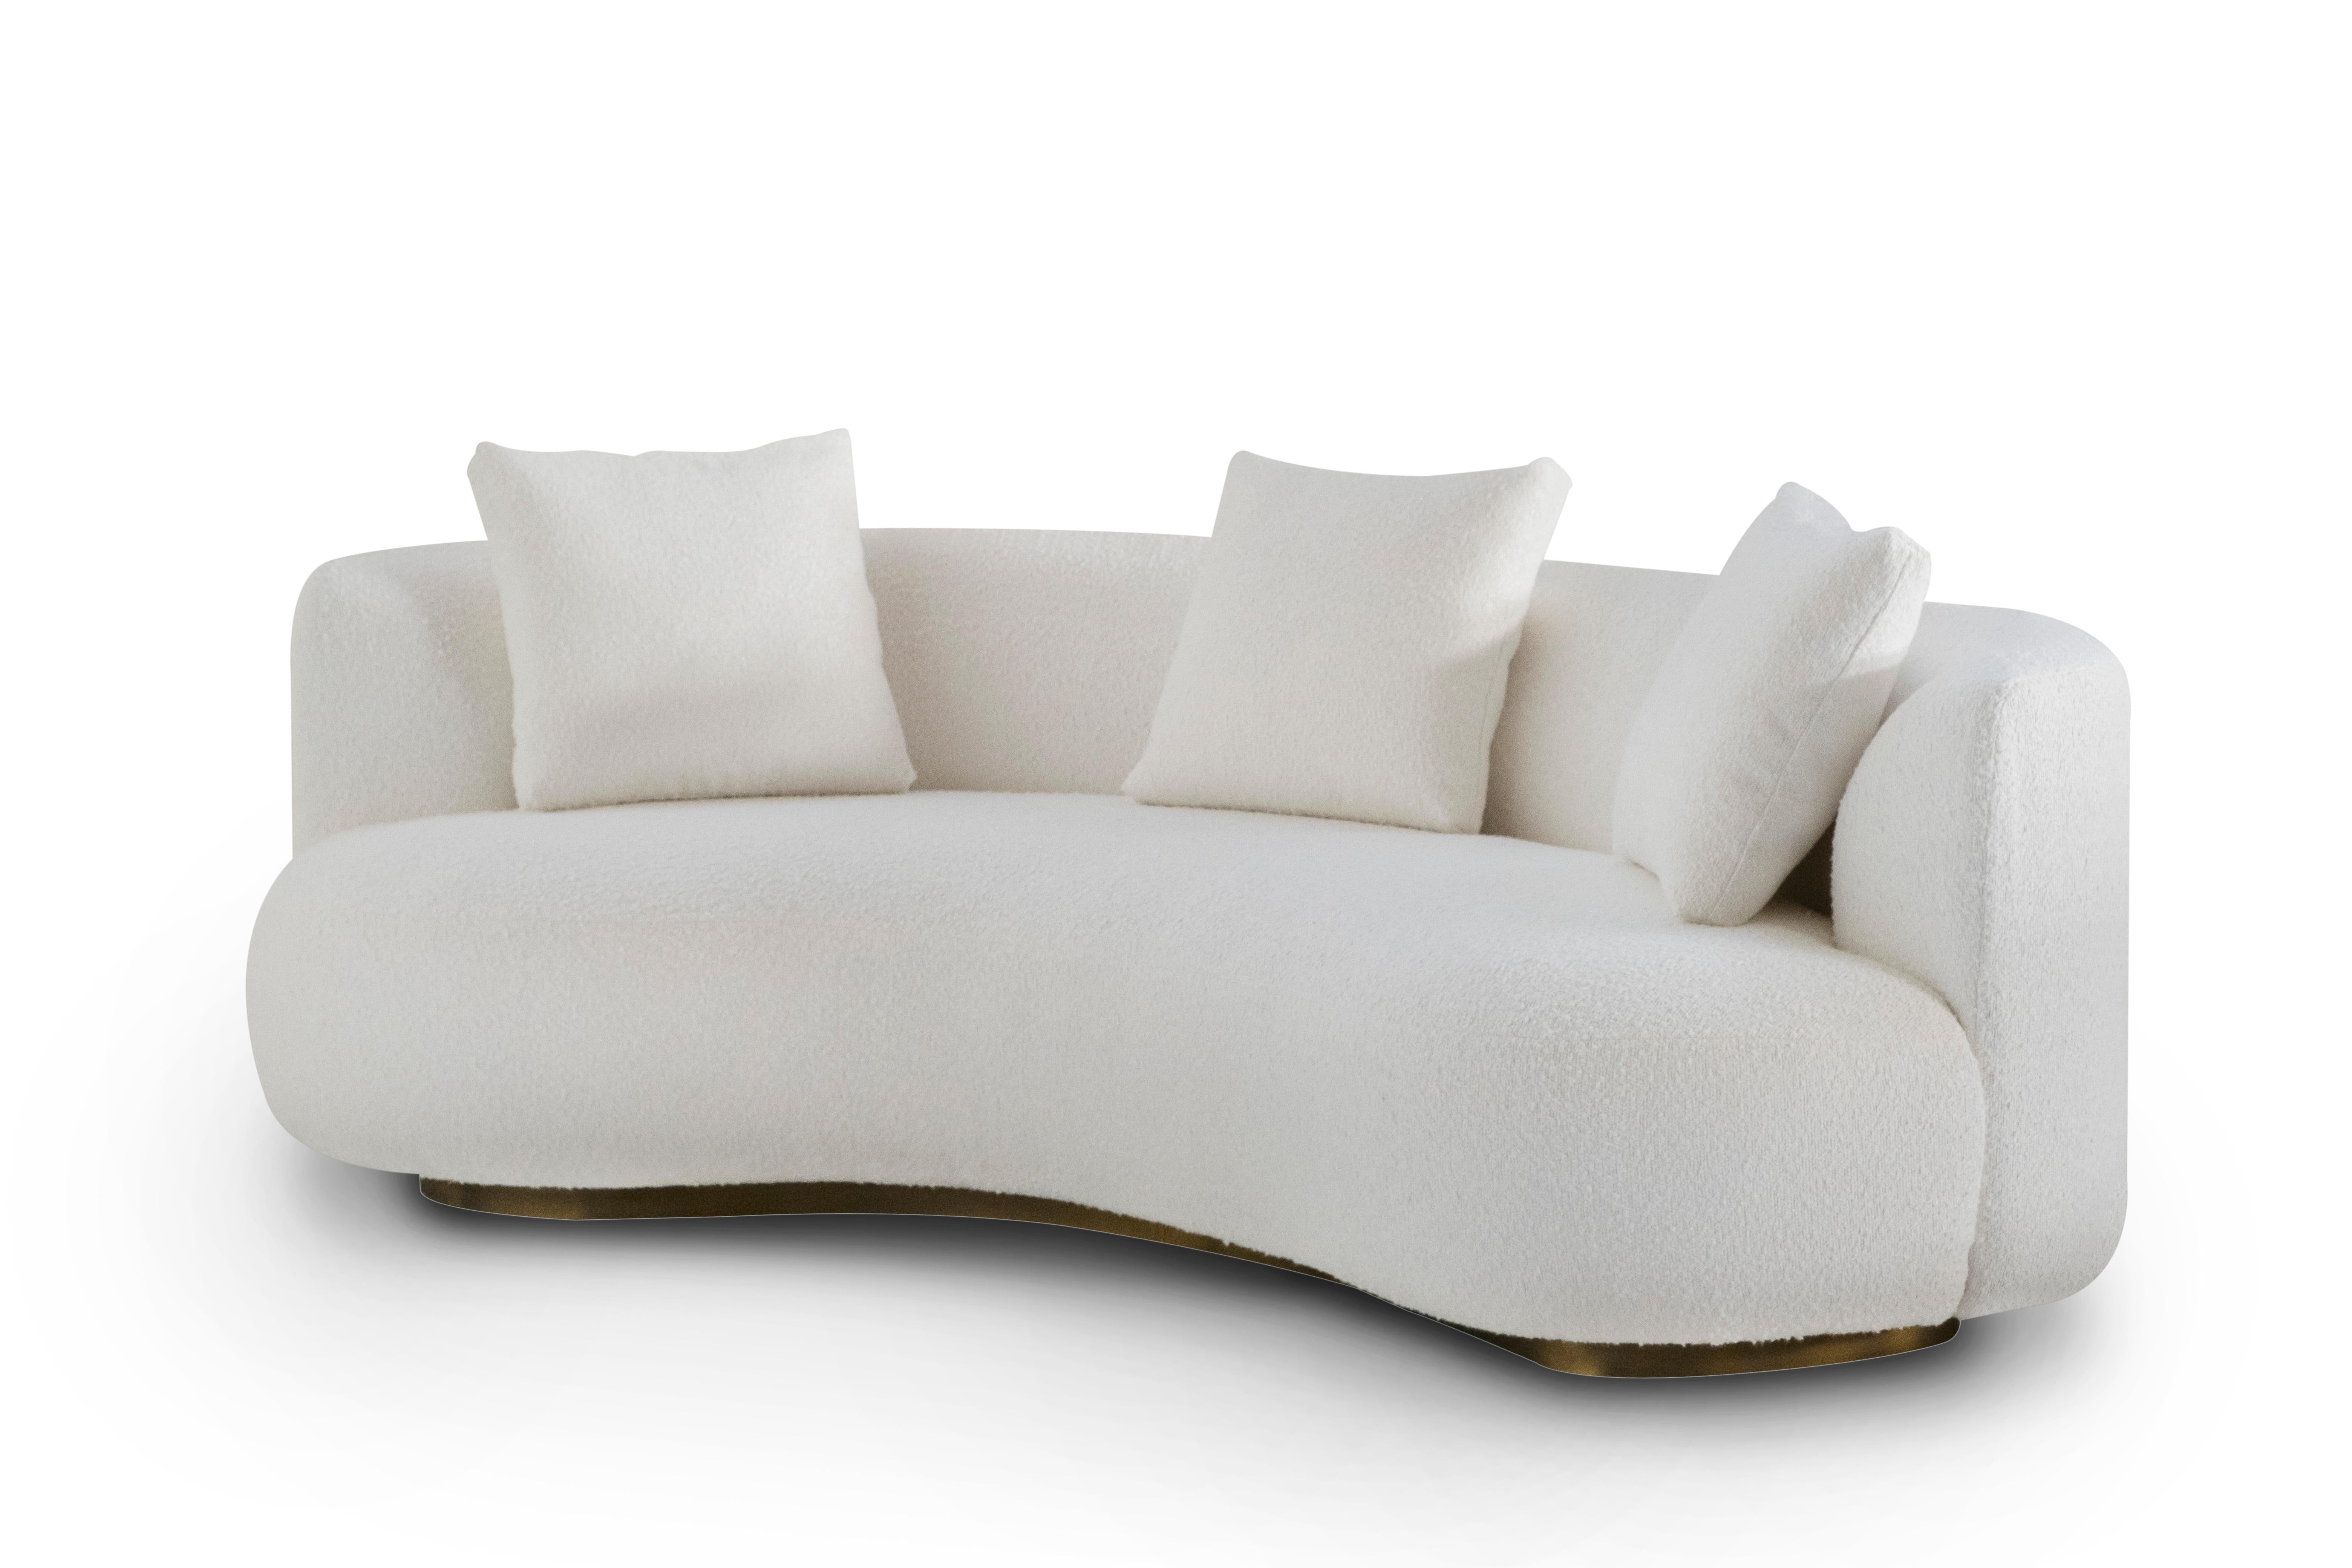 Twins sofa, Contemporary Collection, Handcrafted in Portugal - Europe by Greenapple.

Designed by Rute Martins for the Contemporary Collection, The Twins curved sofa and day bed share the same genes, yet each possesses a distinct design, creating a